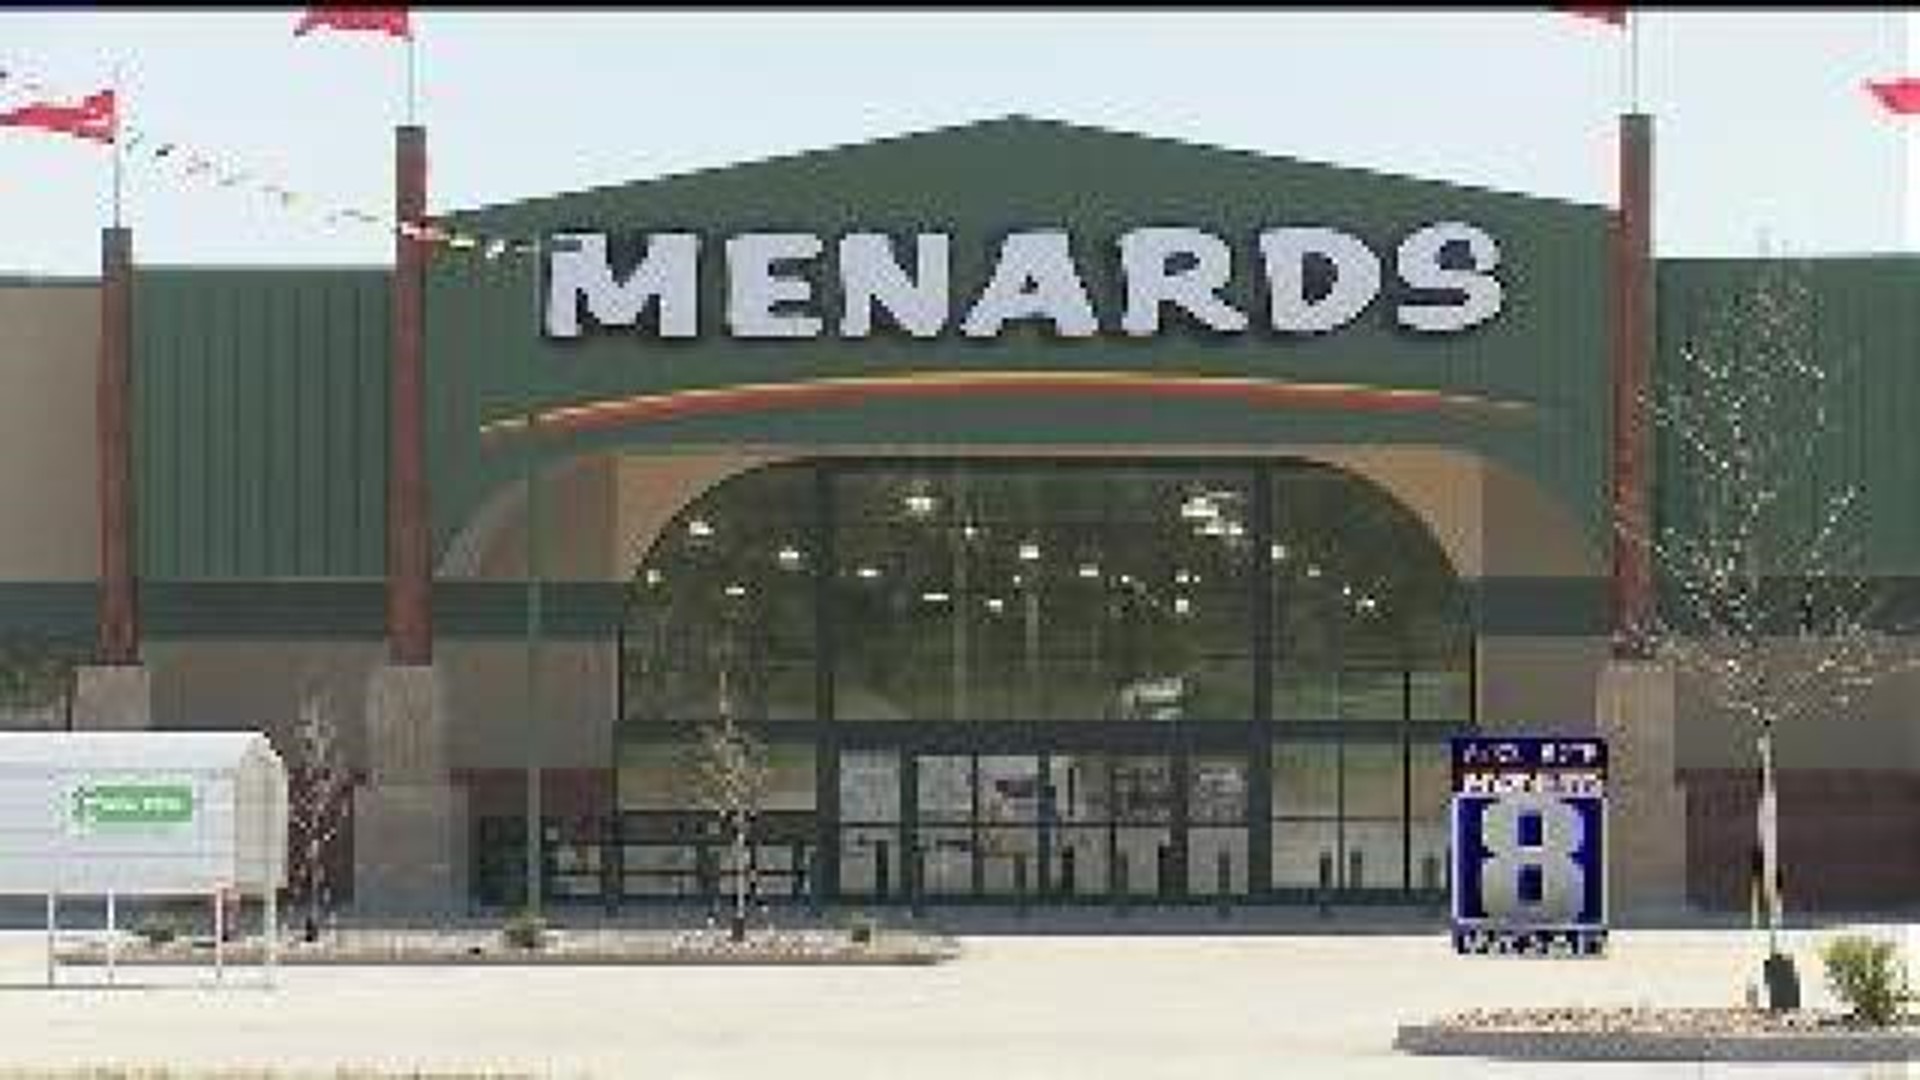 The new Moline Menards store is scheduled to open on April 10th